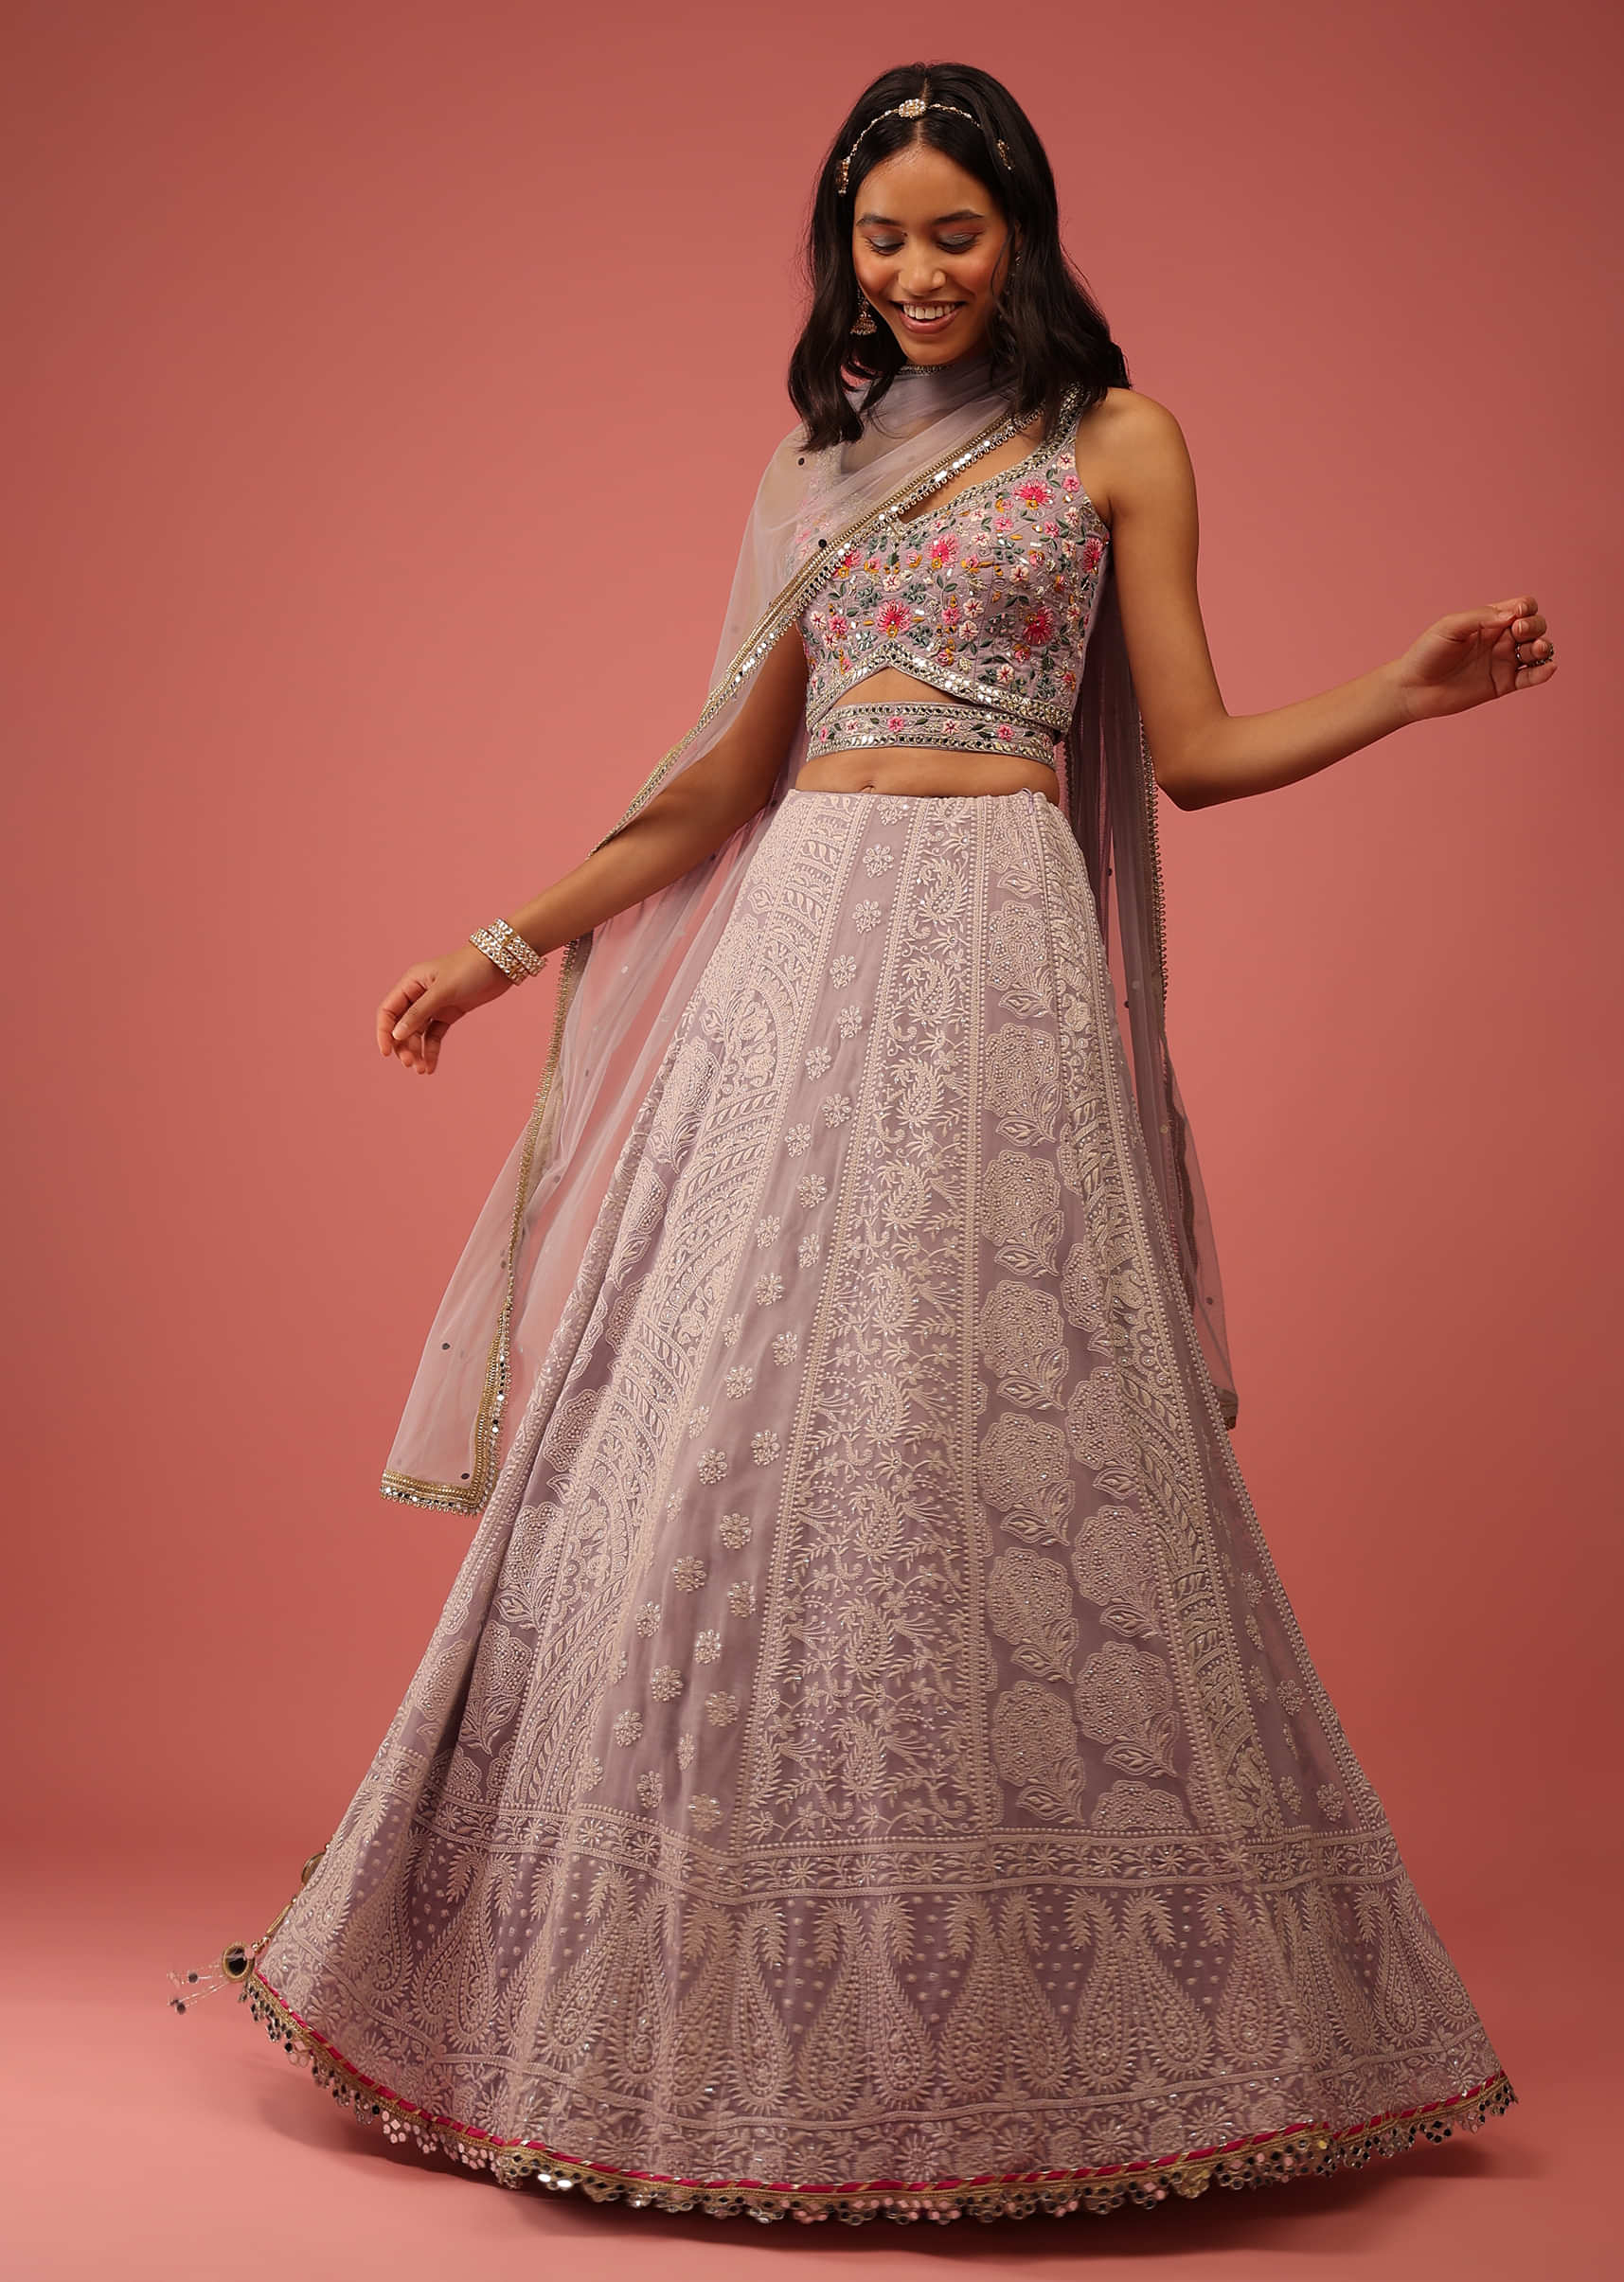 Smoke Lavender Lehenga Choli With Lucknowi Thread Work And multicolor Resham And Mirror Accents